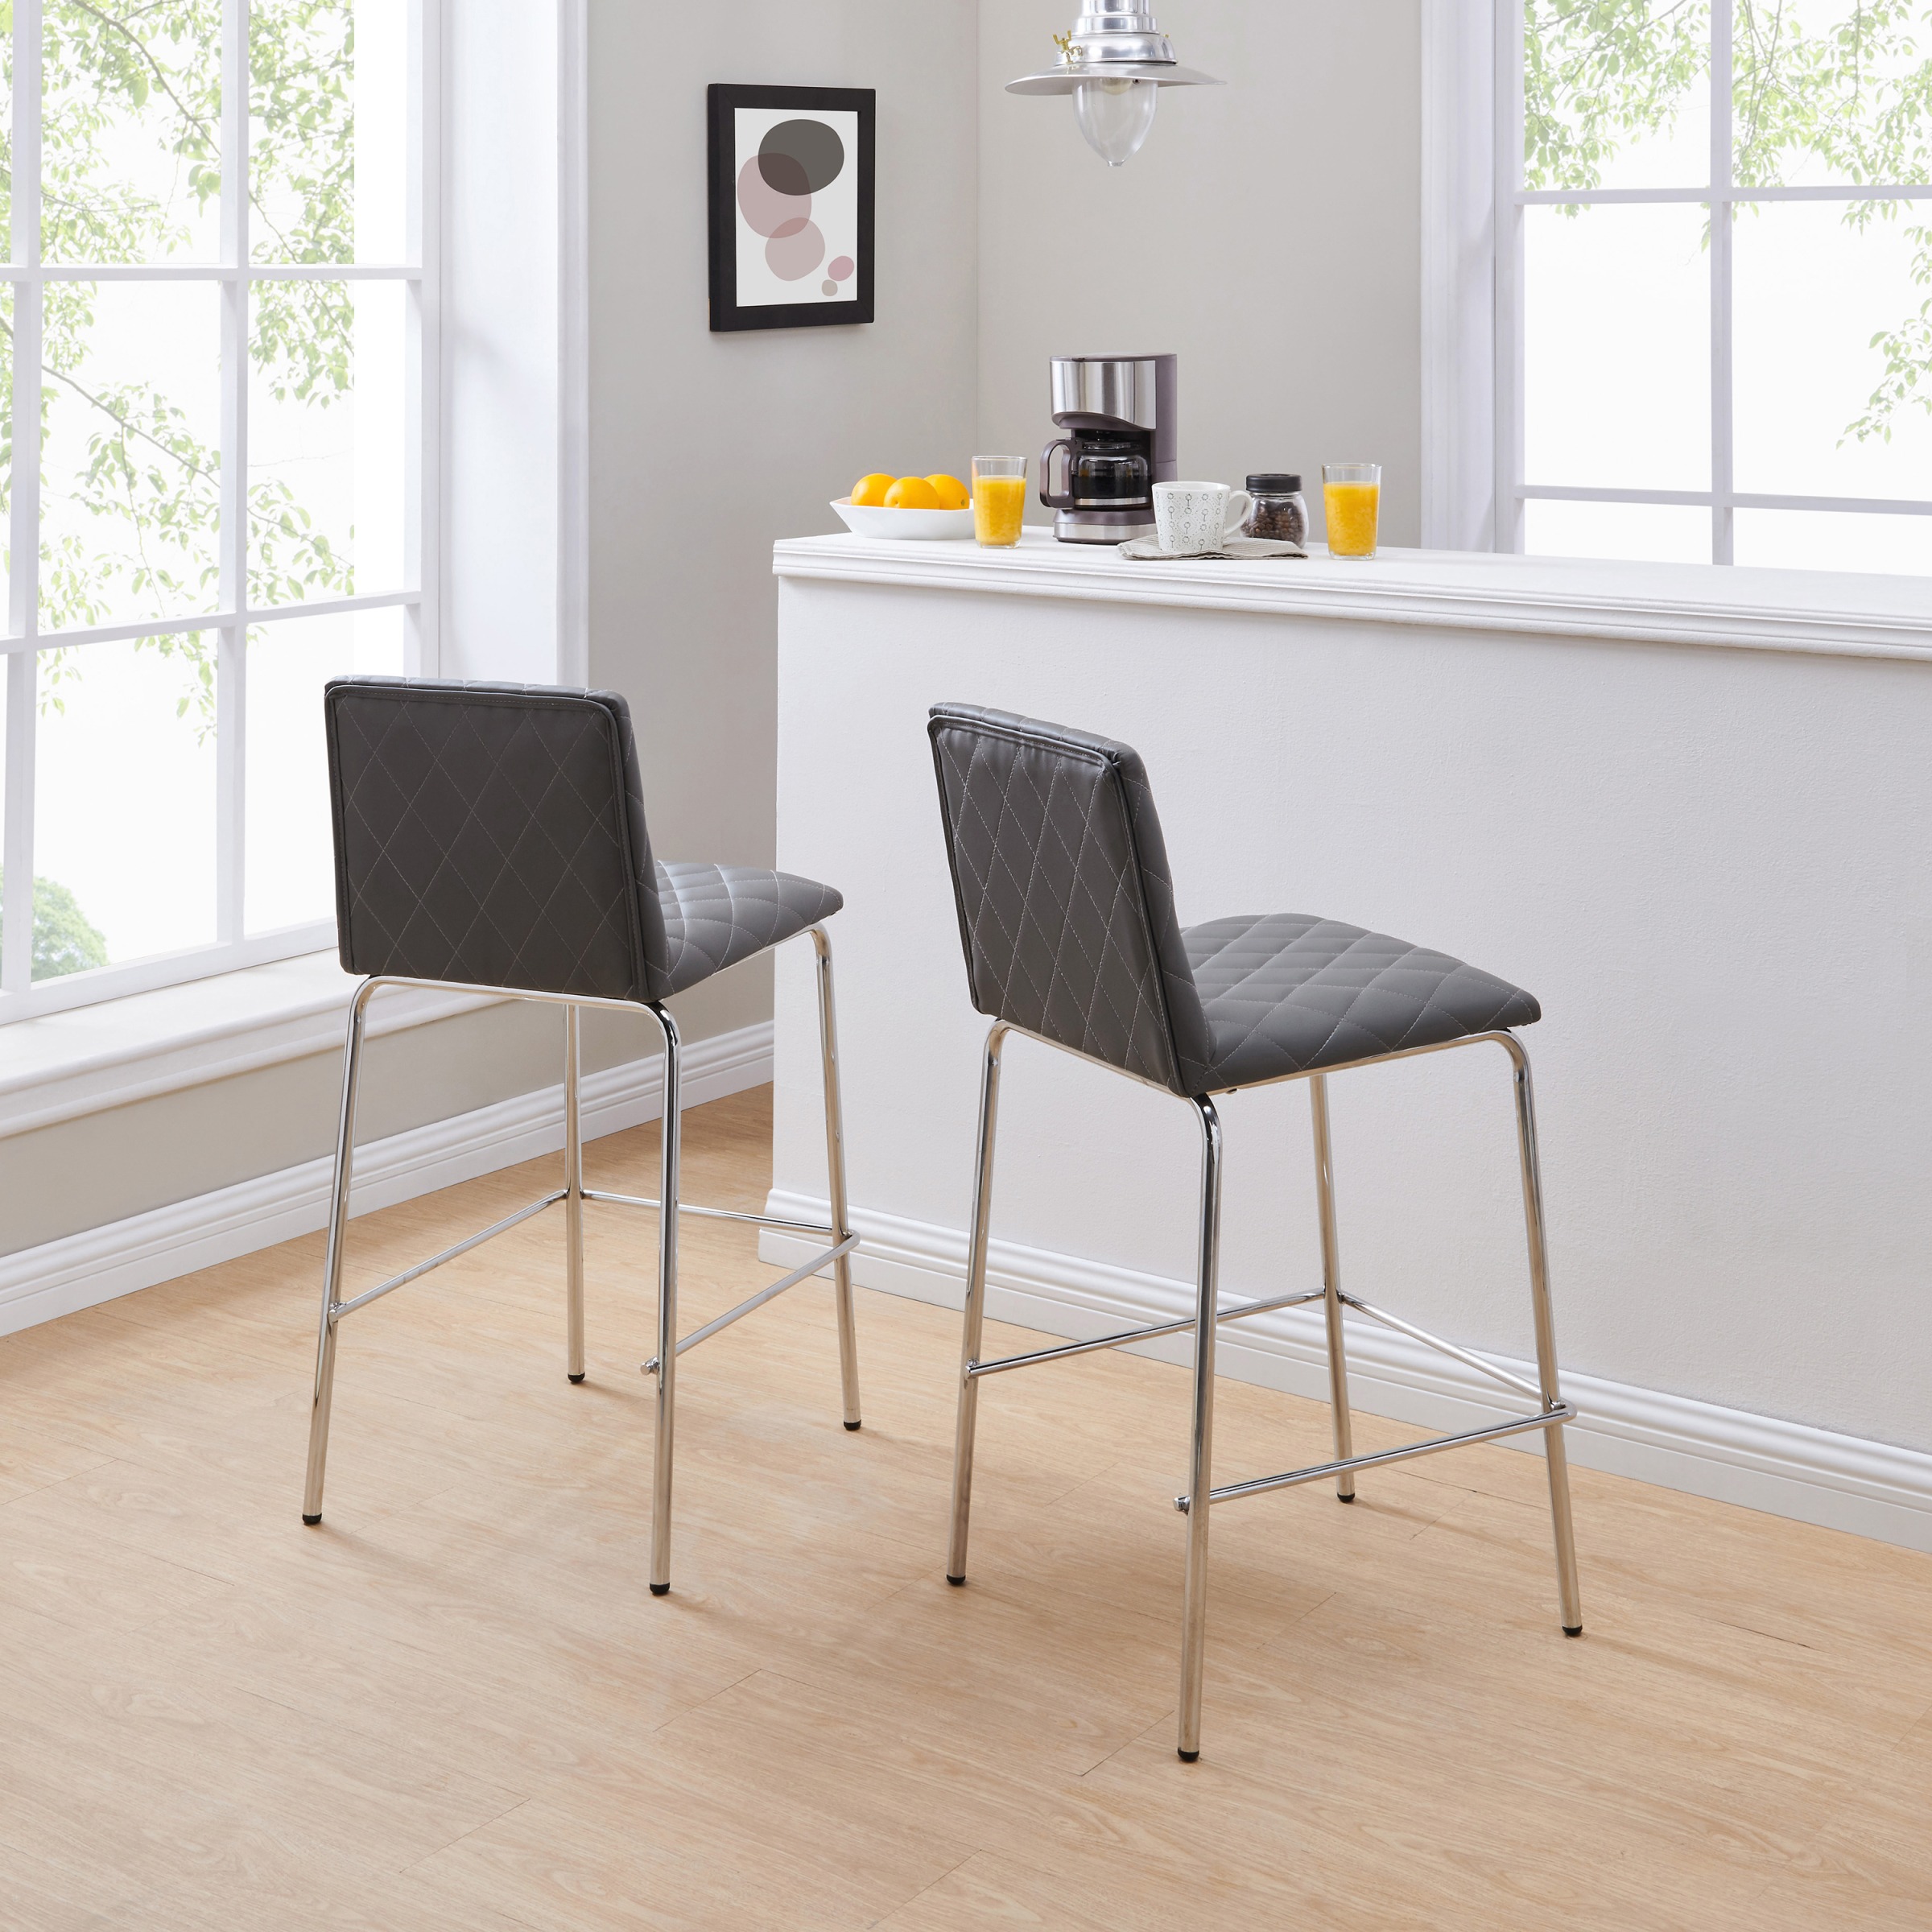 Better Homes & Gardens Etta Quilted Counter Stools (Set of 2) Only $32.00!